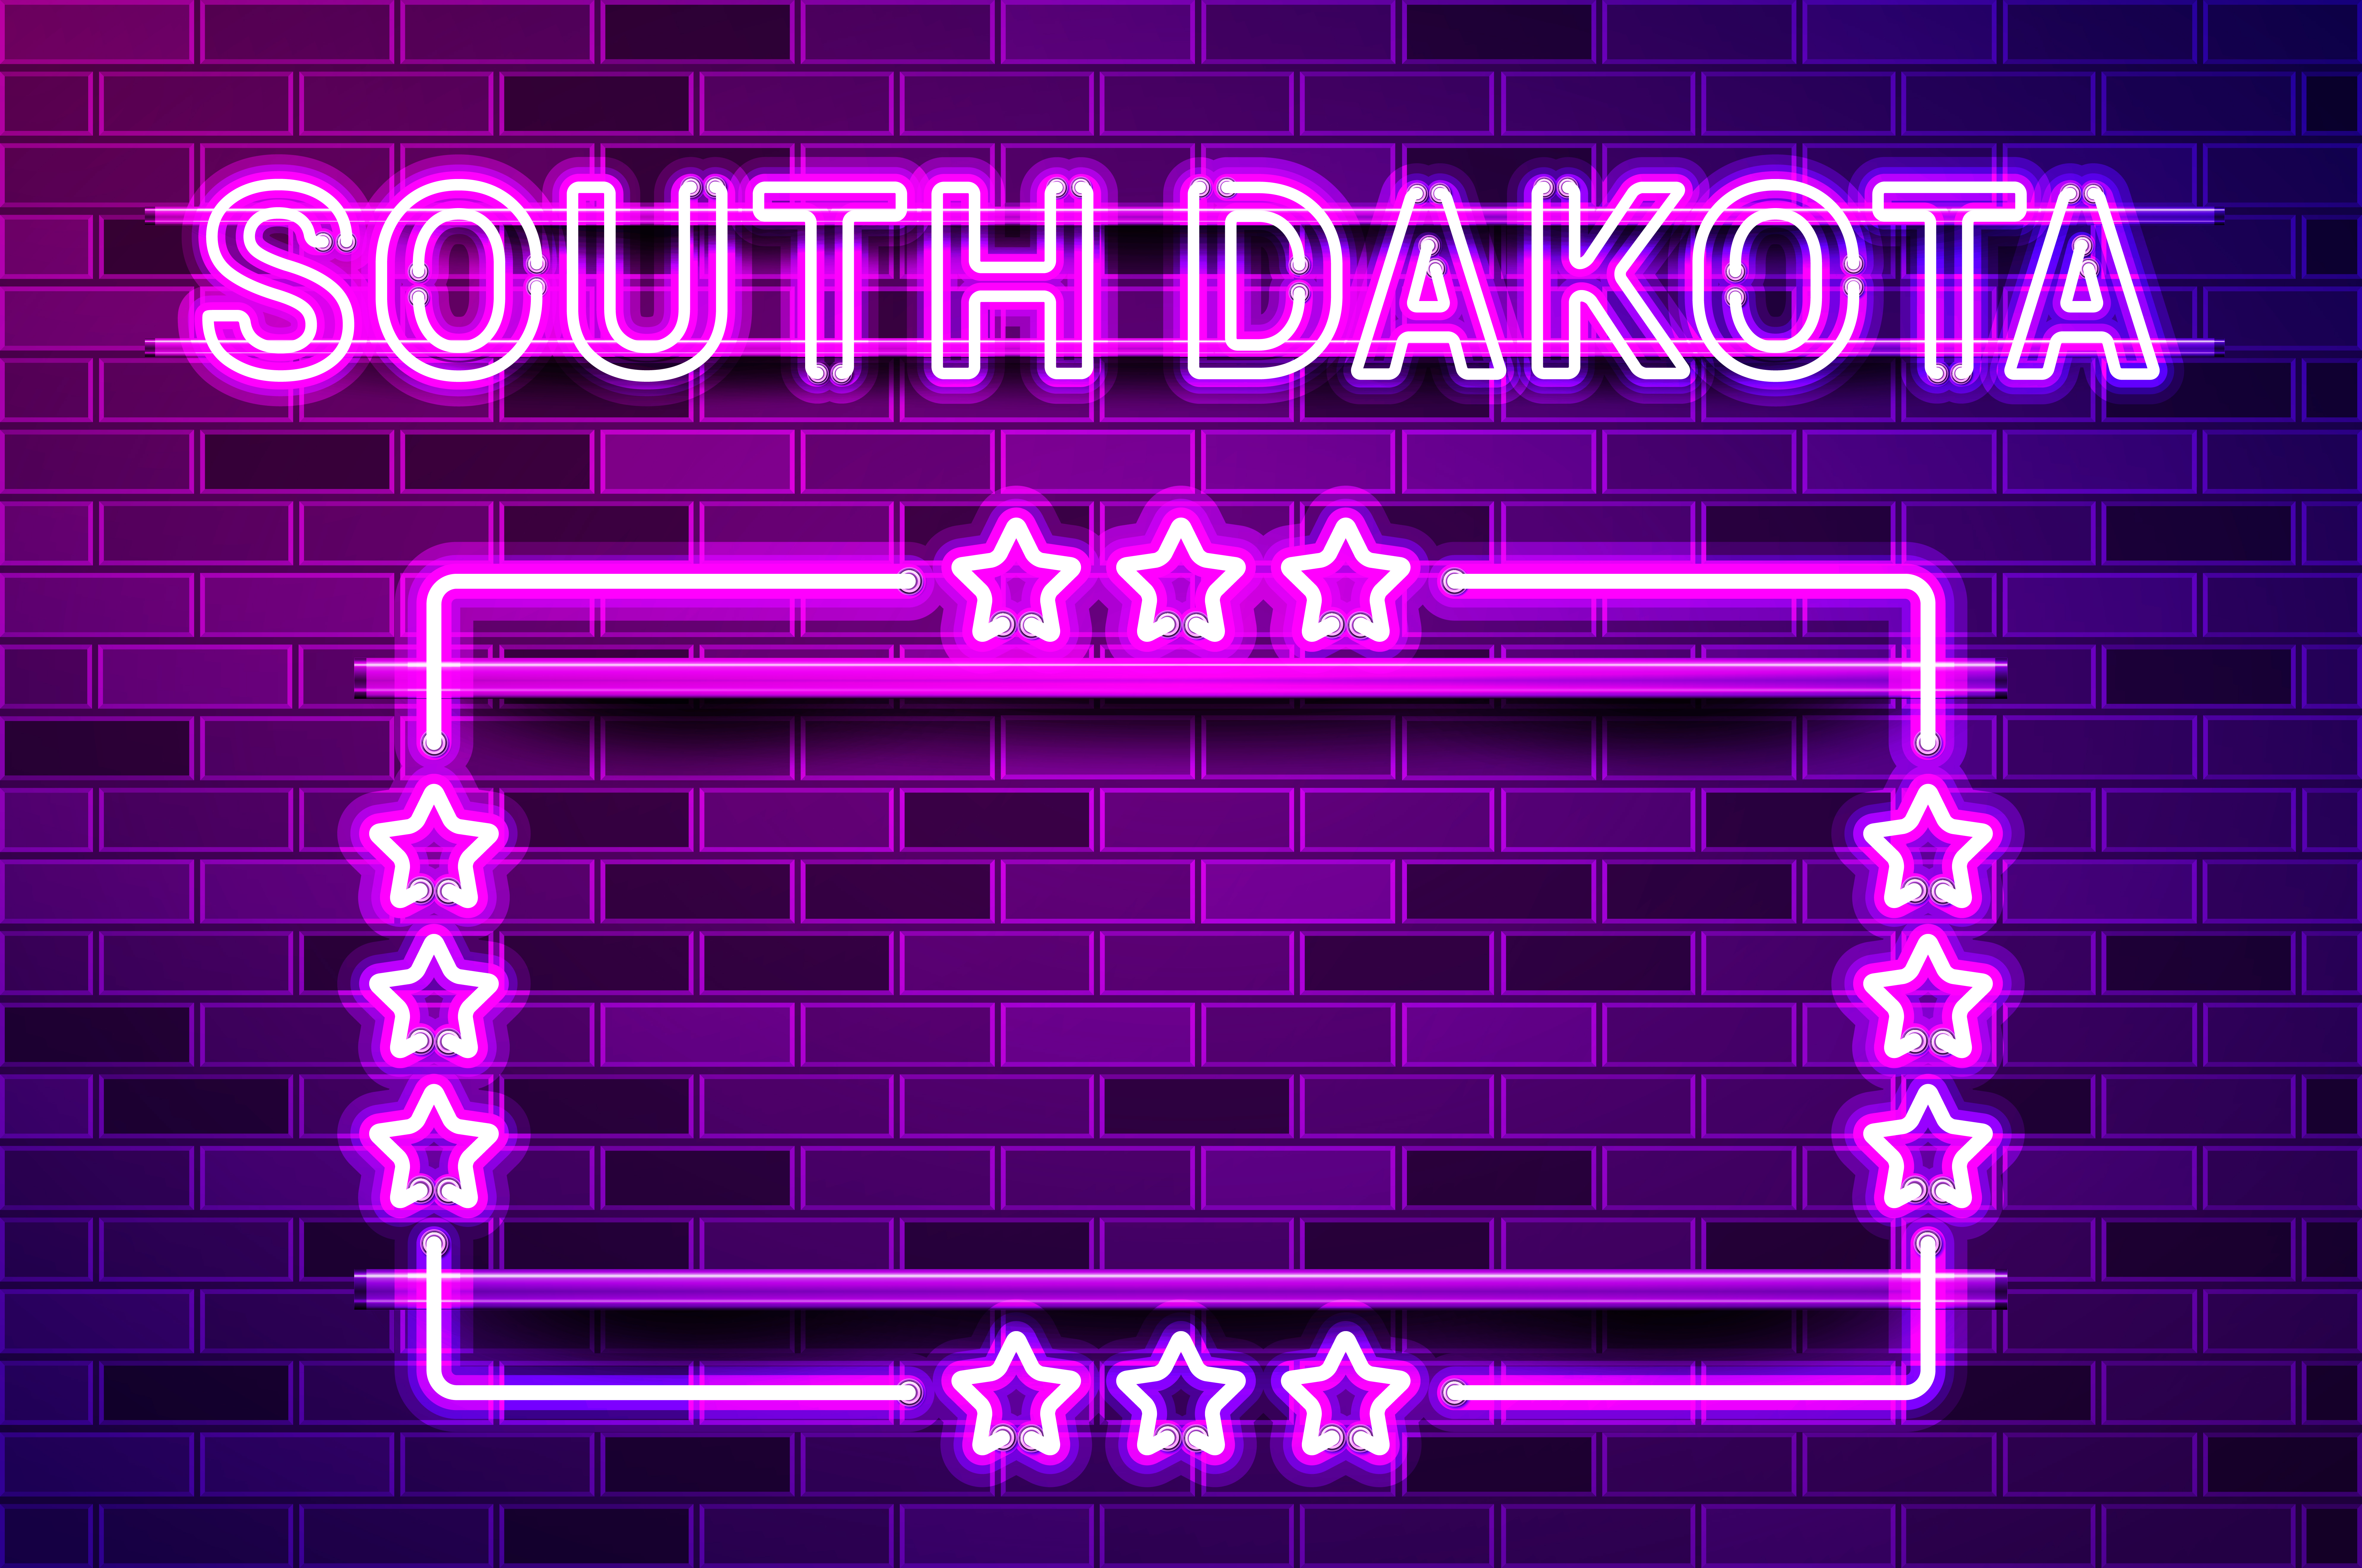 South Dakota US State glowing purple neon lettering and a rectangular frame with stars. Realistic vector illustration. Purple brick wall, violet glow, metal holders.. South Dakota US State glowing purple neon lettering and a rectangular frame with stars